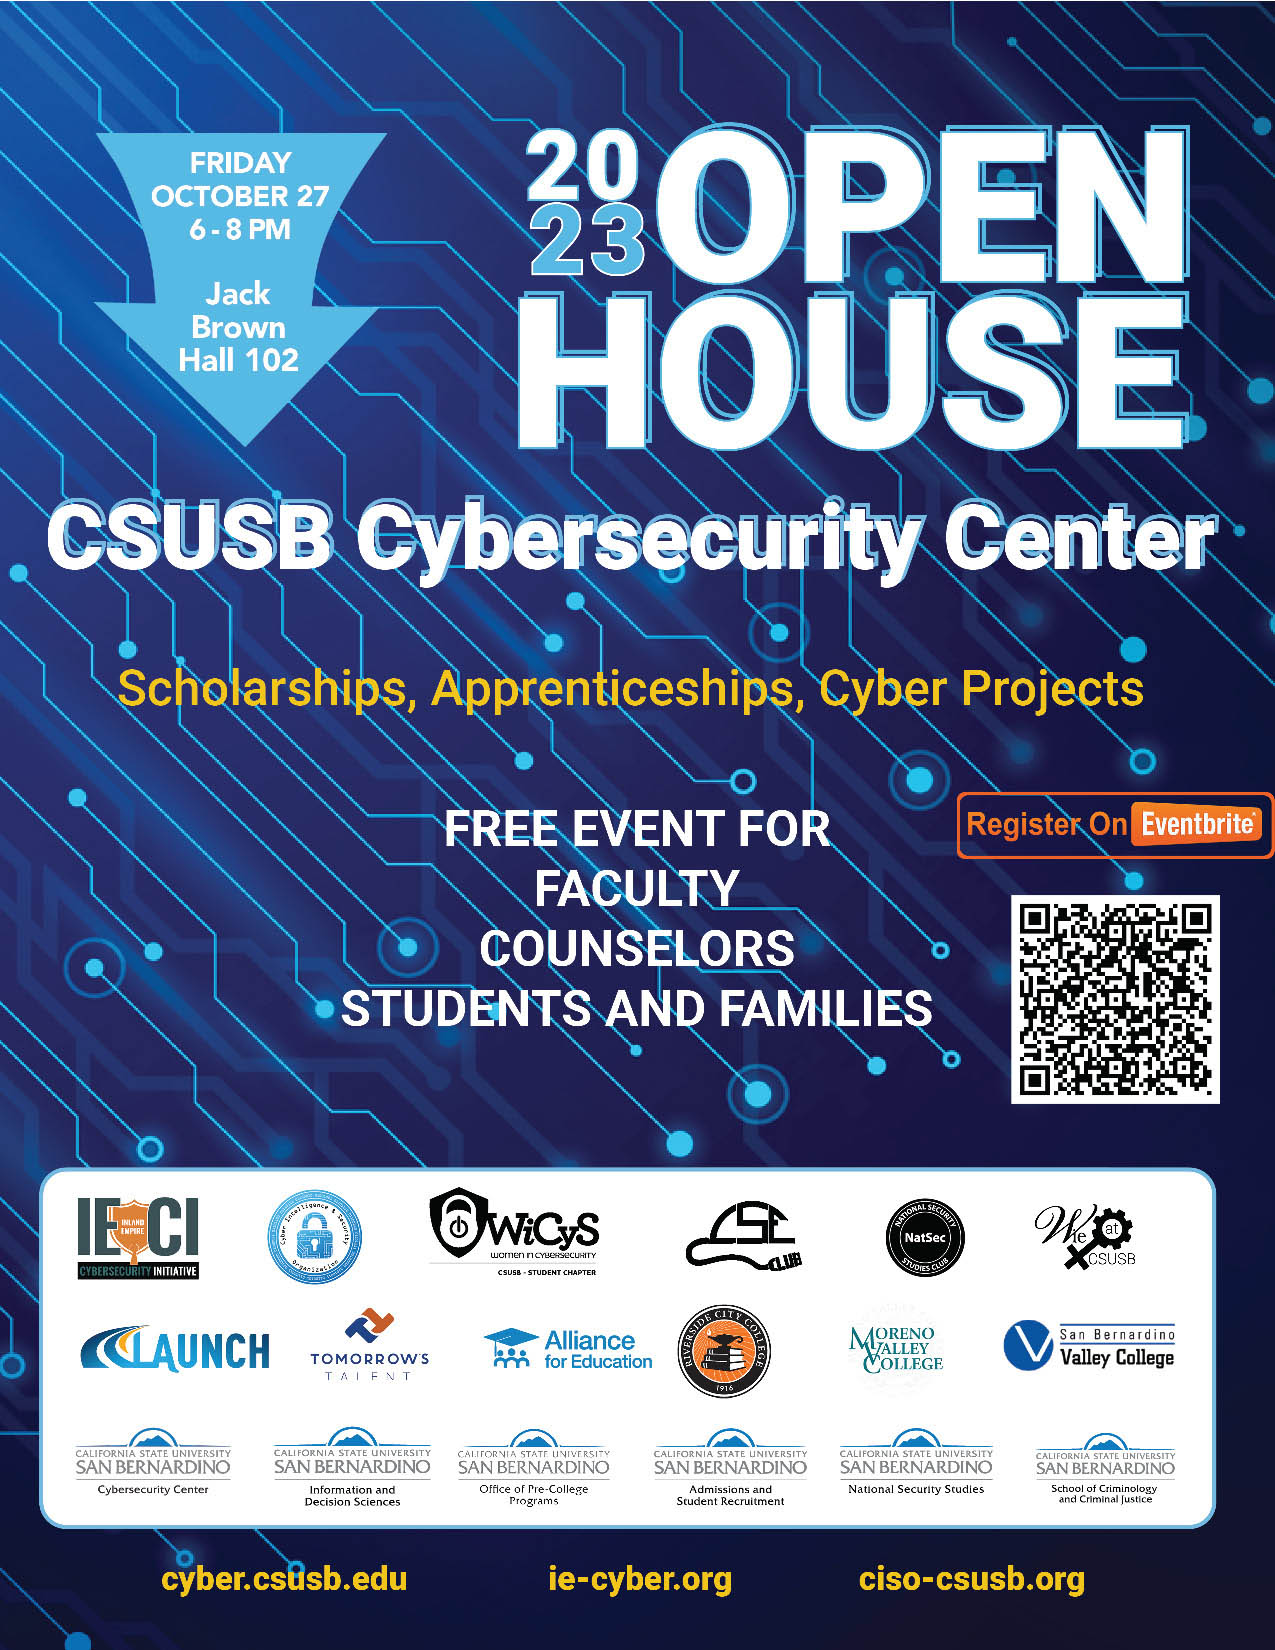 Cybersecurity Center Open House event flyer